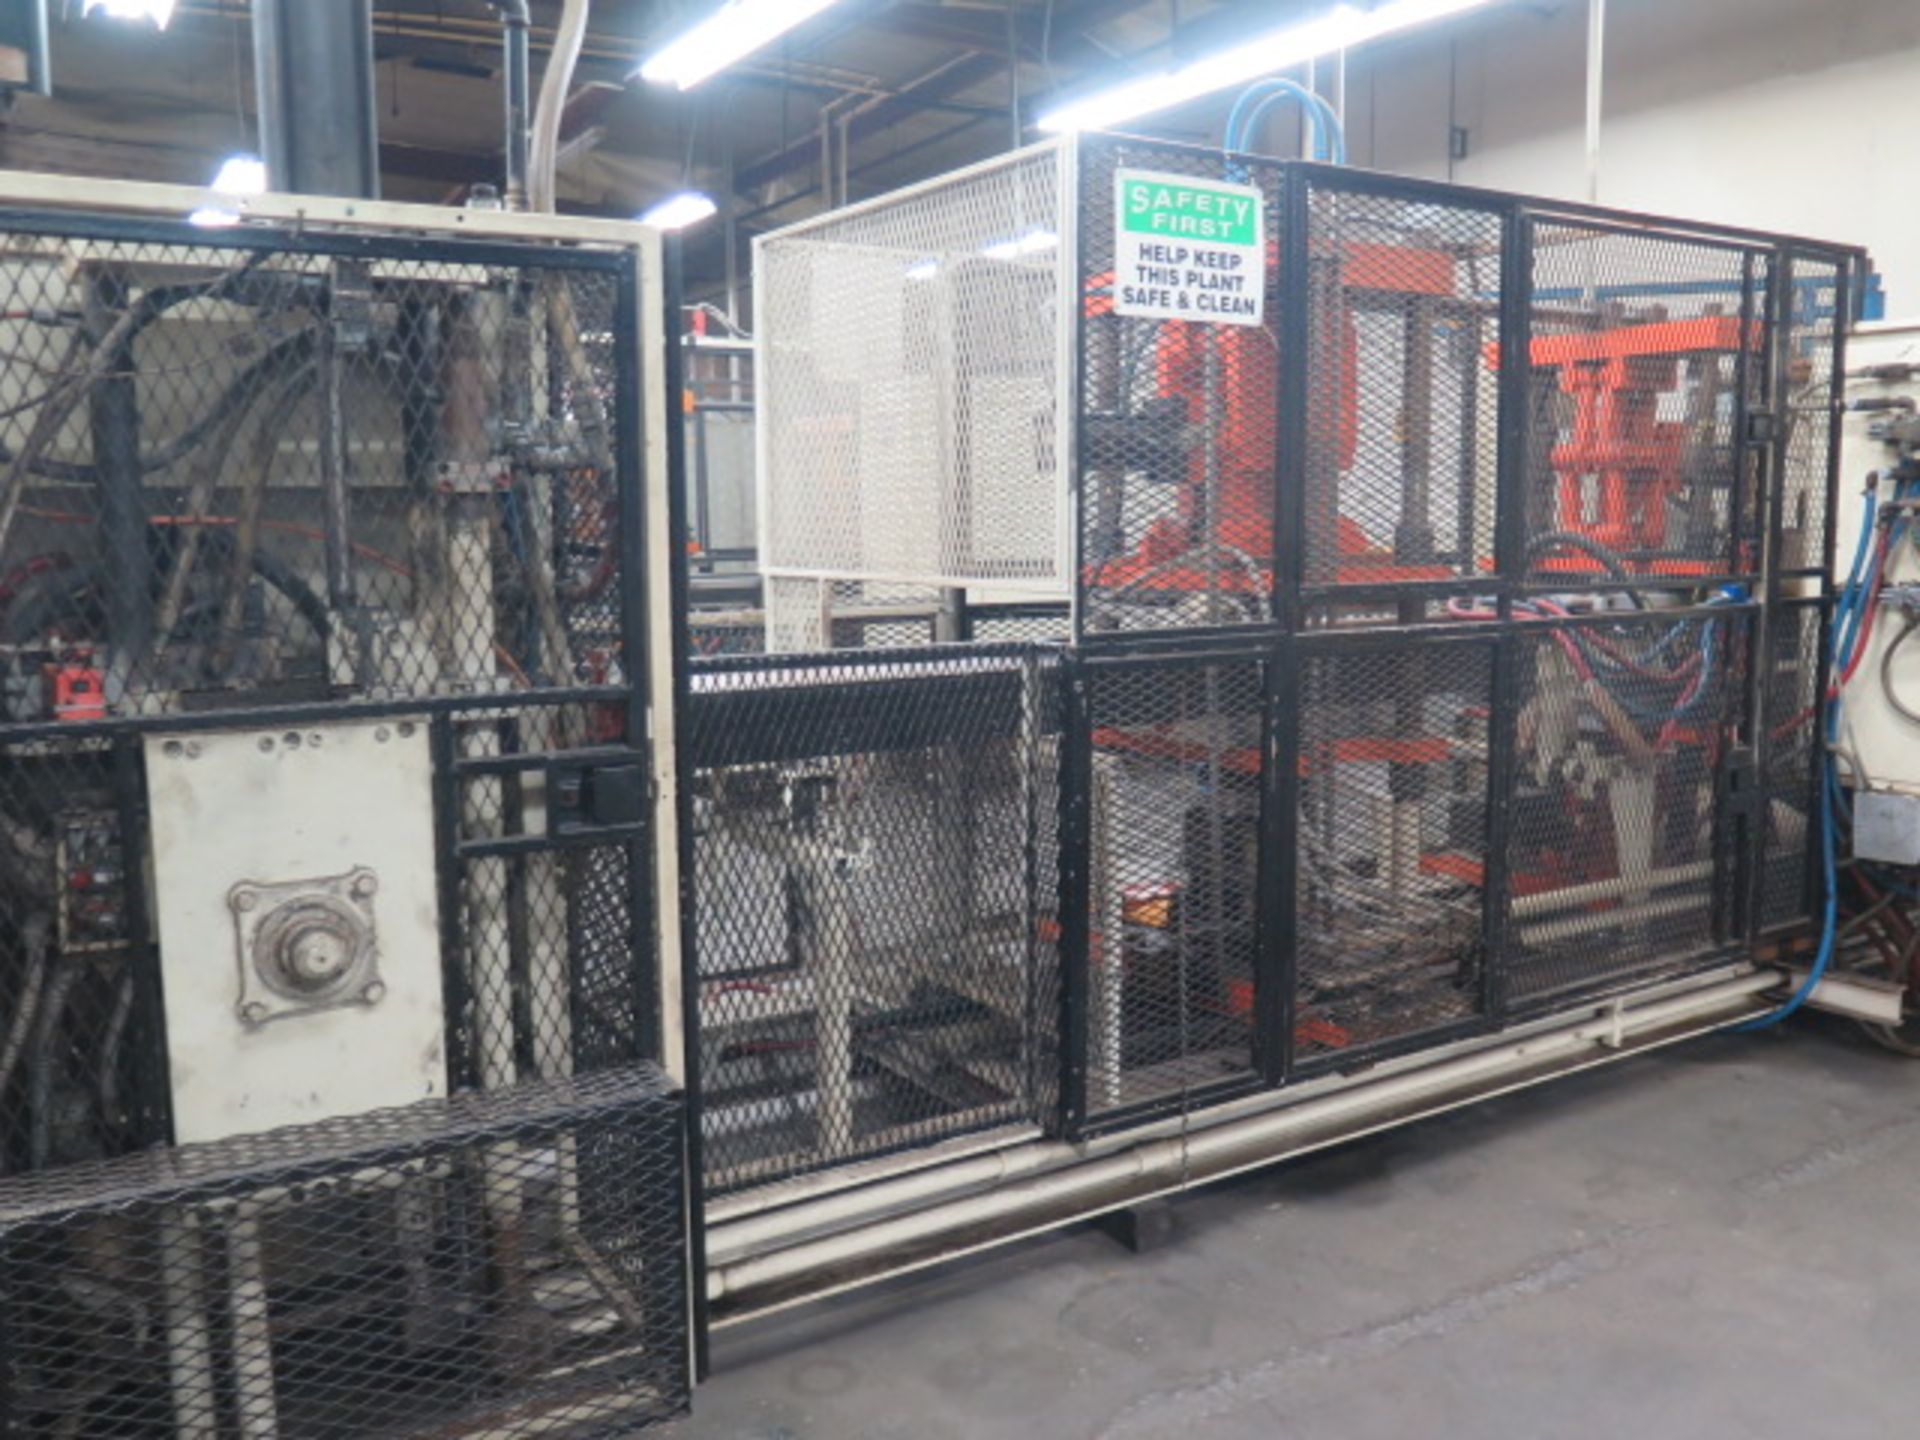 Sencorp Systems Thermoforming w/ Sencorp Controls, Film Preheater, 10” x 30” Vacuum, SOLD AS IS - Image 29 of 30